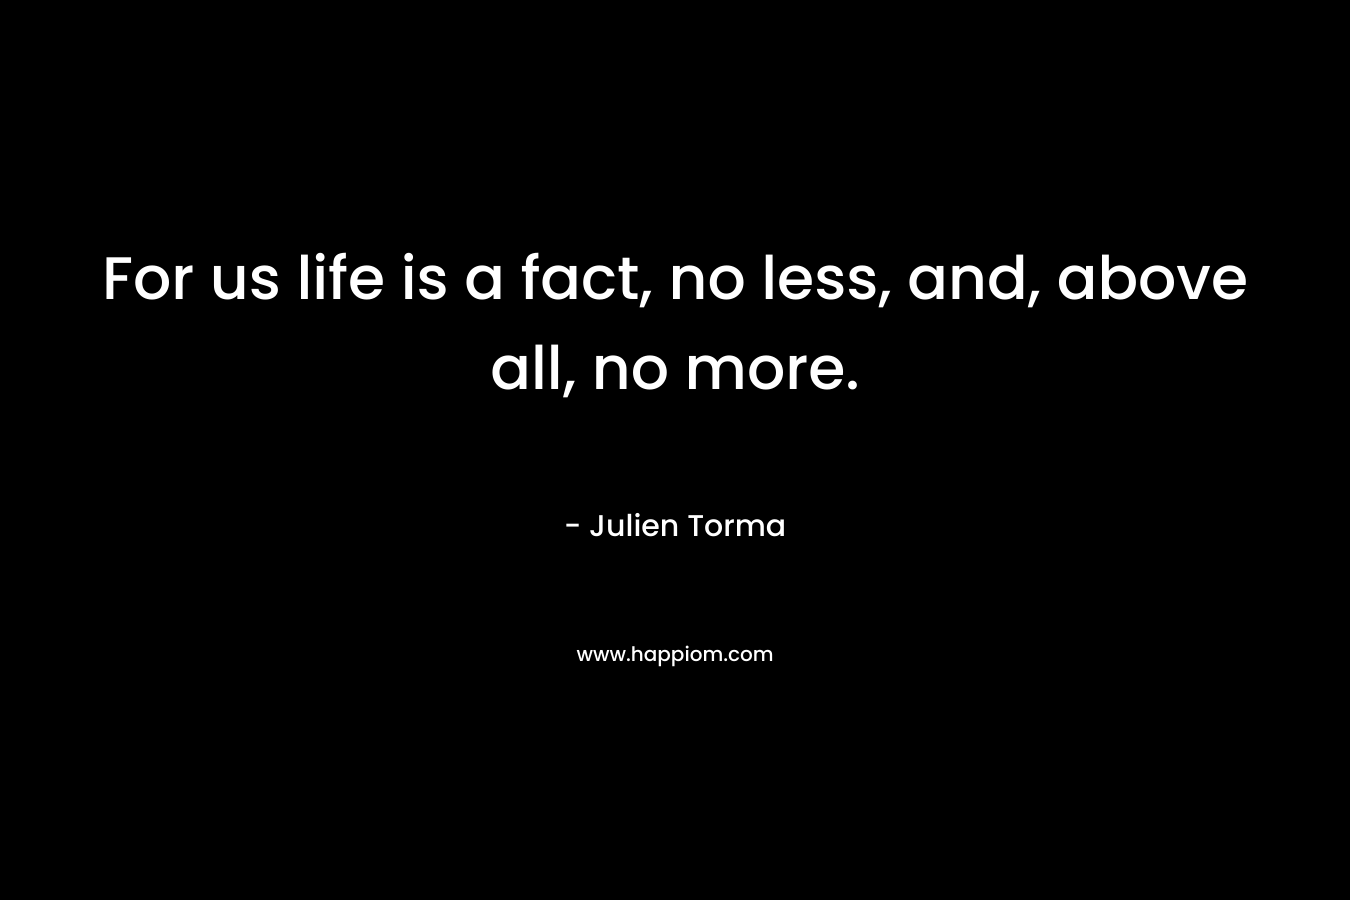 For us life is a fact, no less, and, above all, no more.